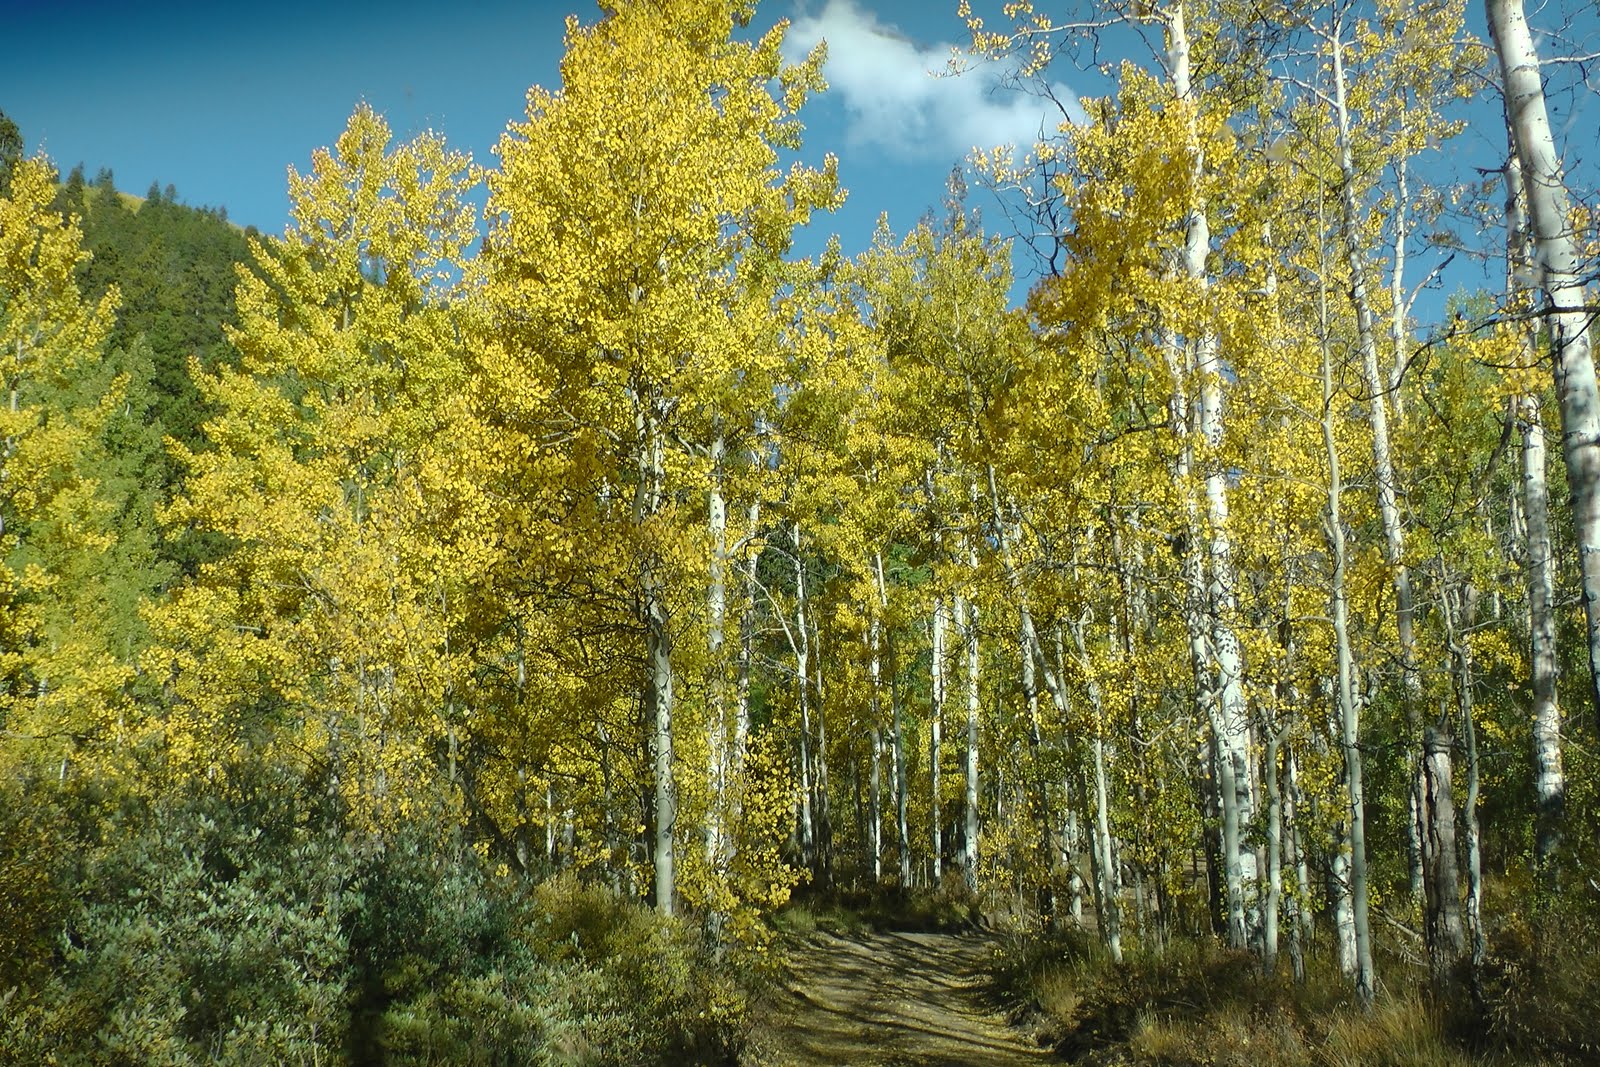 Autumn has come to the Aspen Trees